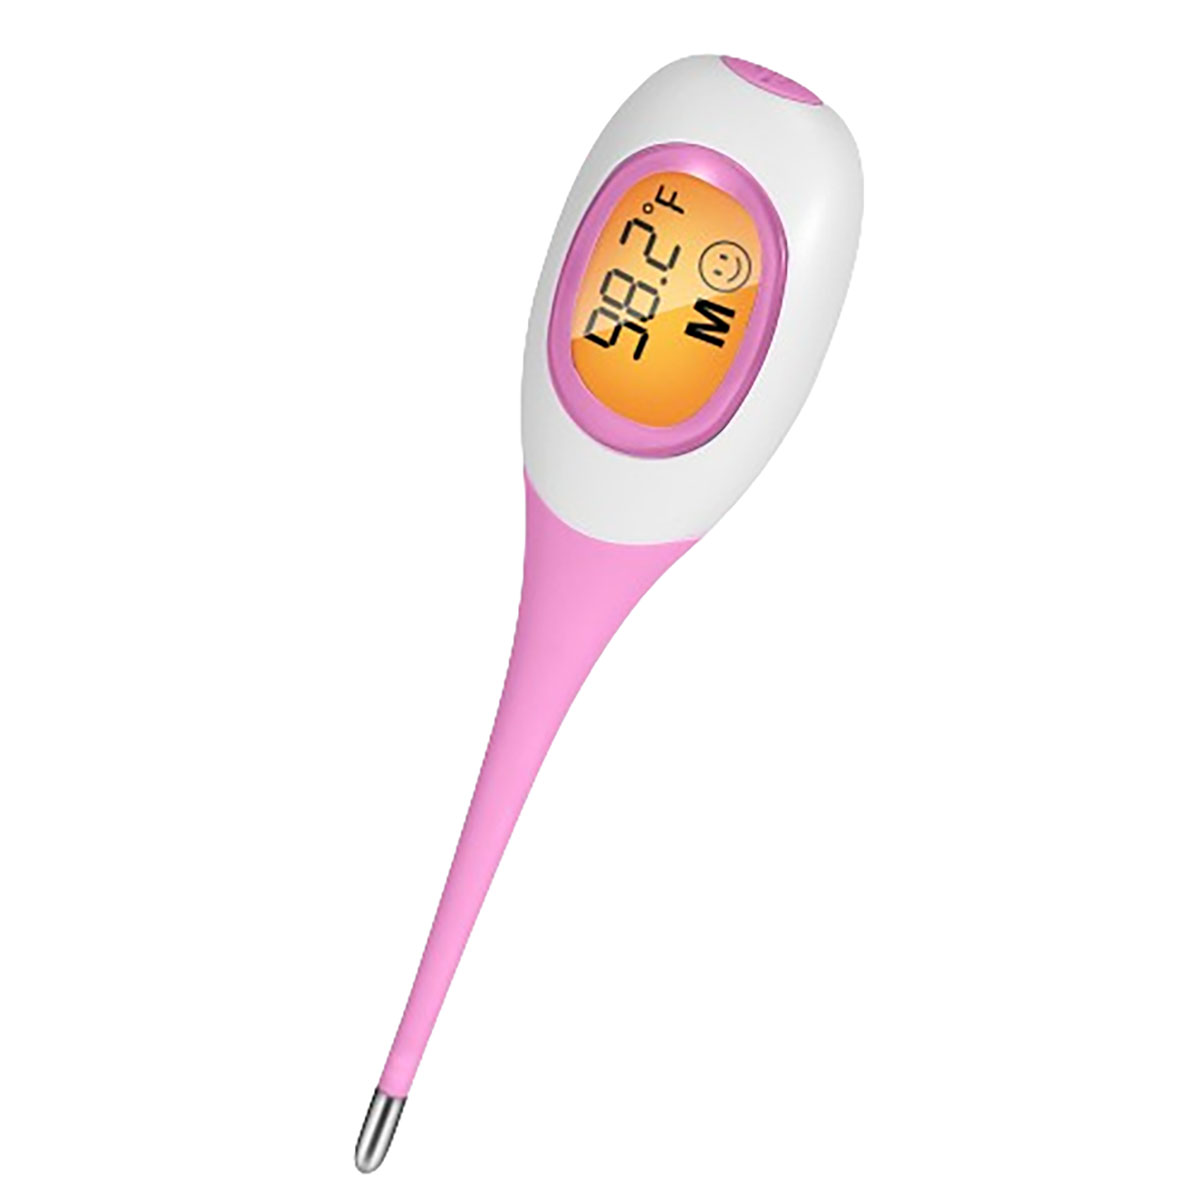 Photos - Thermometer / Barometer GPCT LCD Oral Digital Thermometer - Digital Thermometer PINK HGDIGITALTHEM